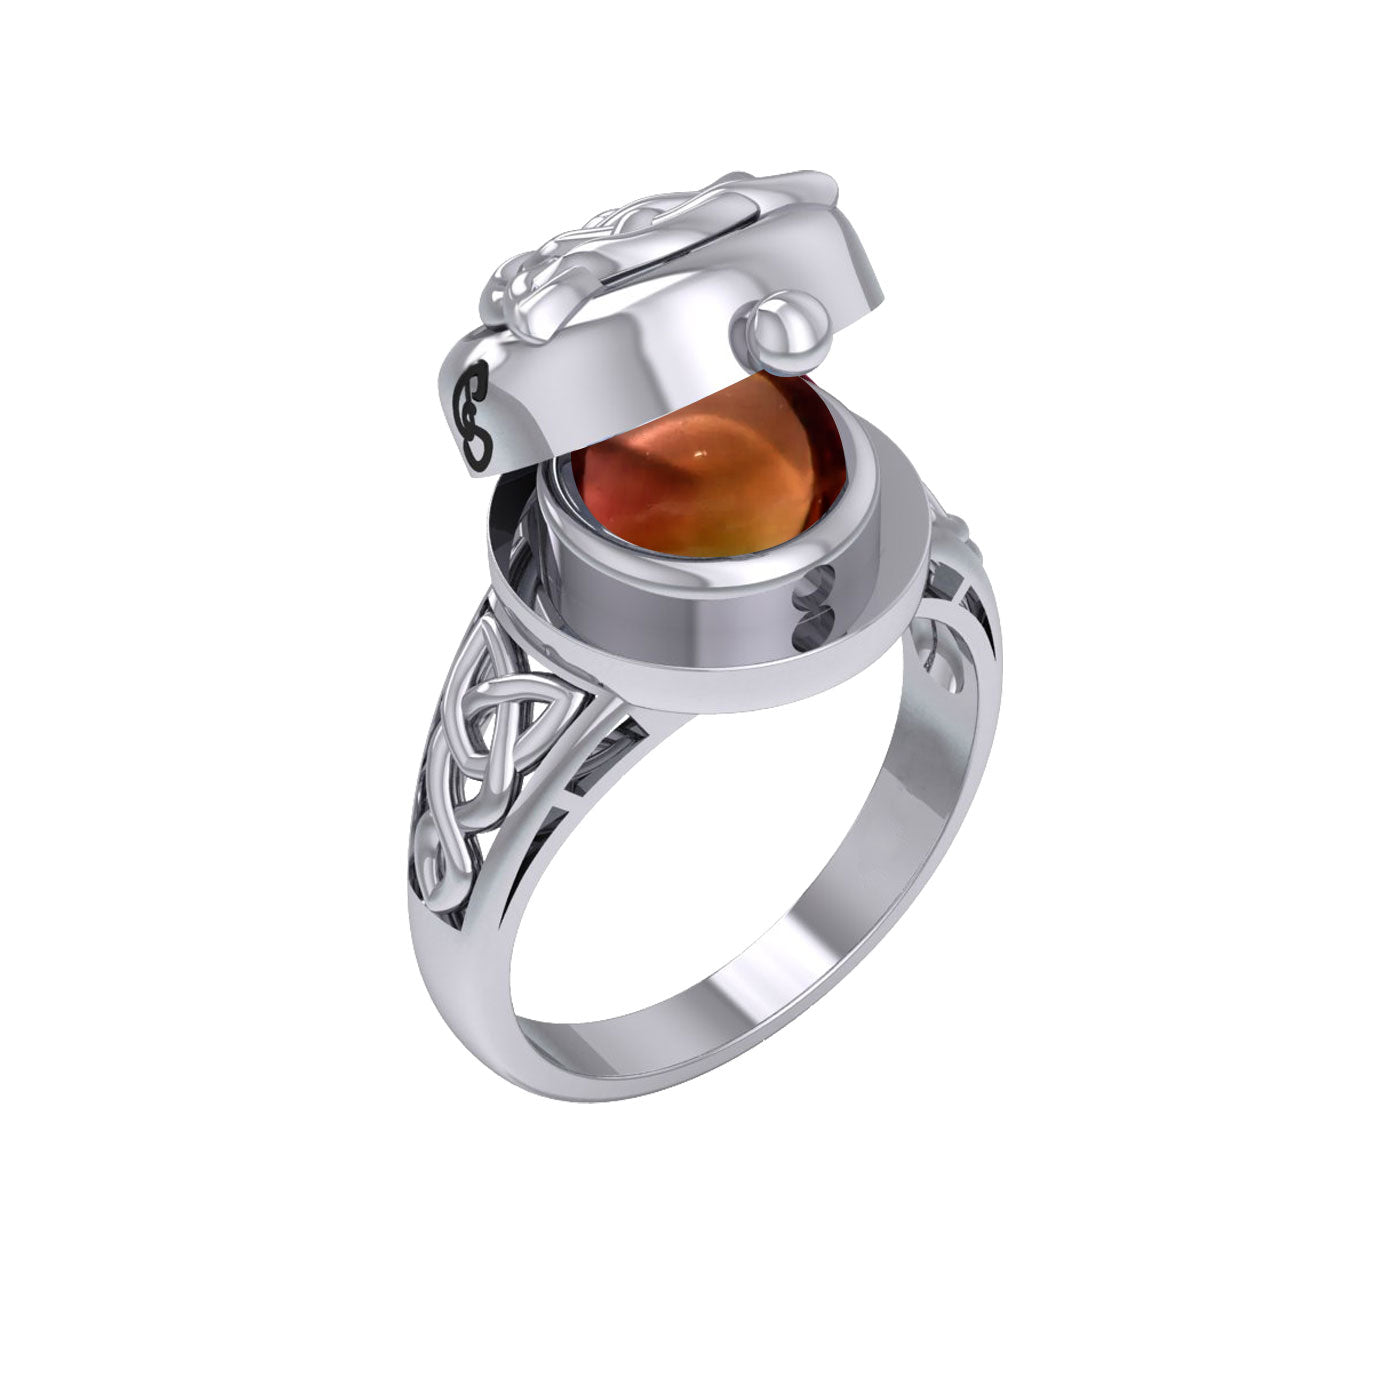 The Celtic Triquetra Silver Locket Ring with Gemstone TRI2436